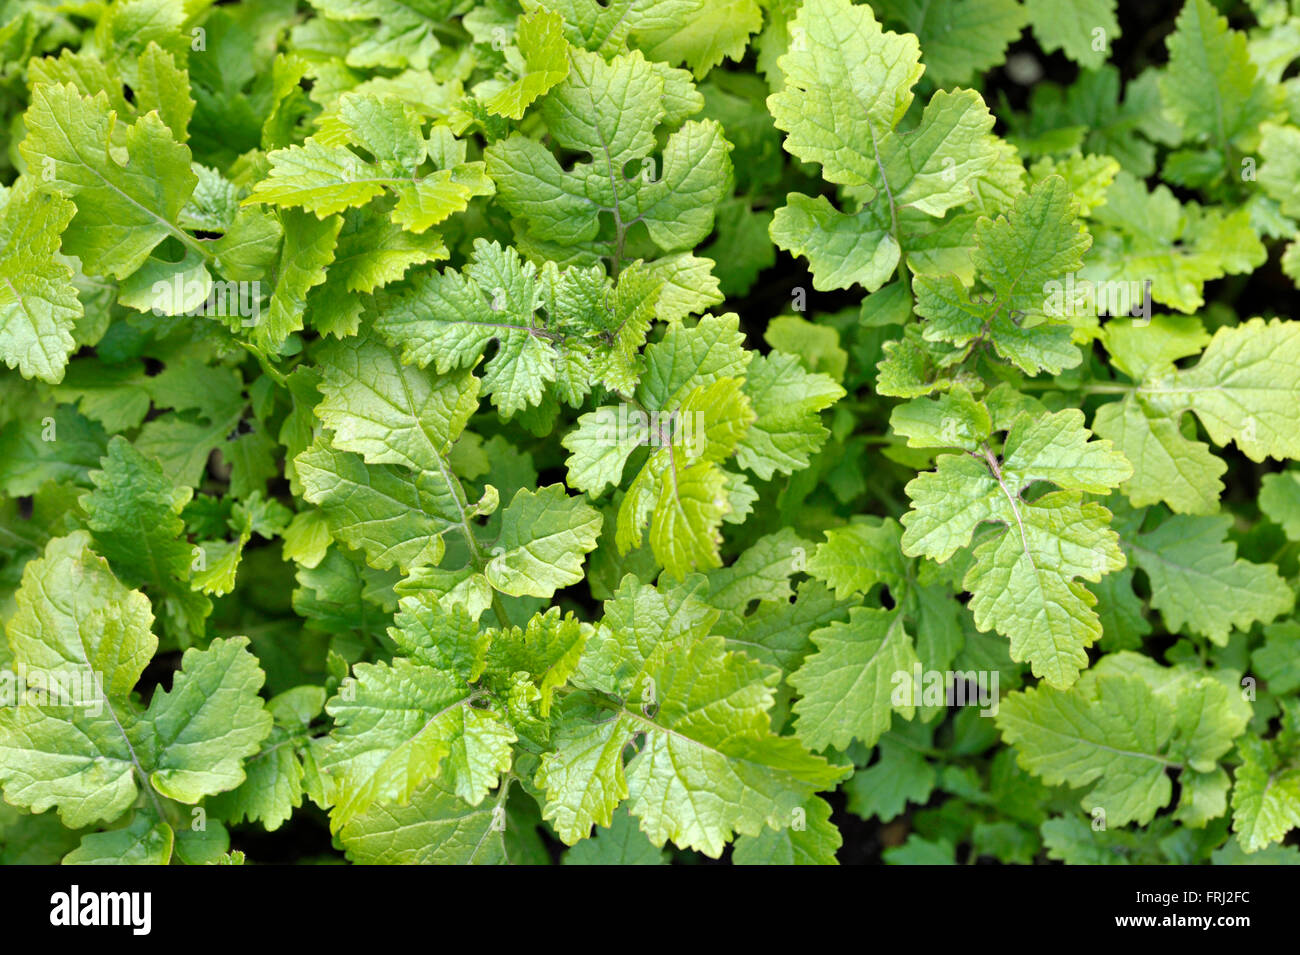 Mustard plants growing, sinapis alba, Brassica Alba or Brassica Hirta, grown for seed or leaves used as a cooking ingredient. Stock Photo